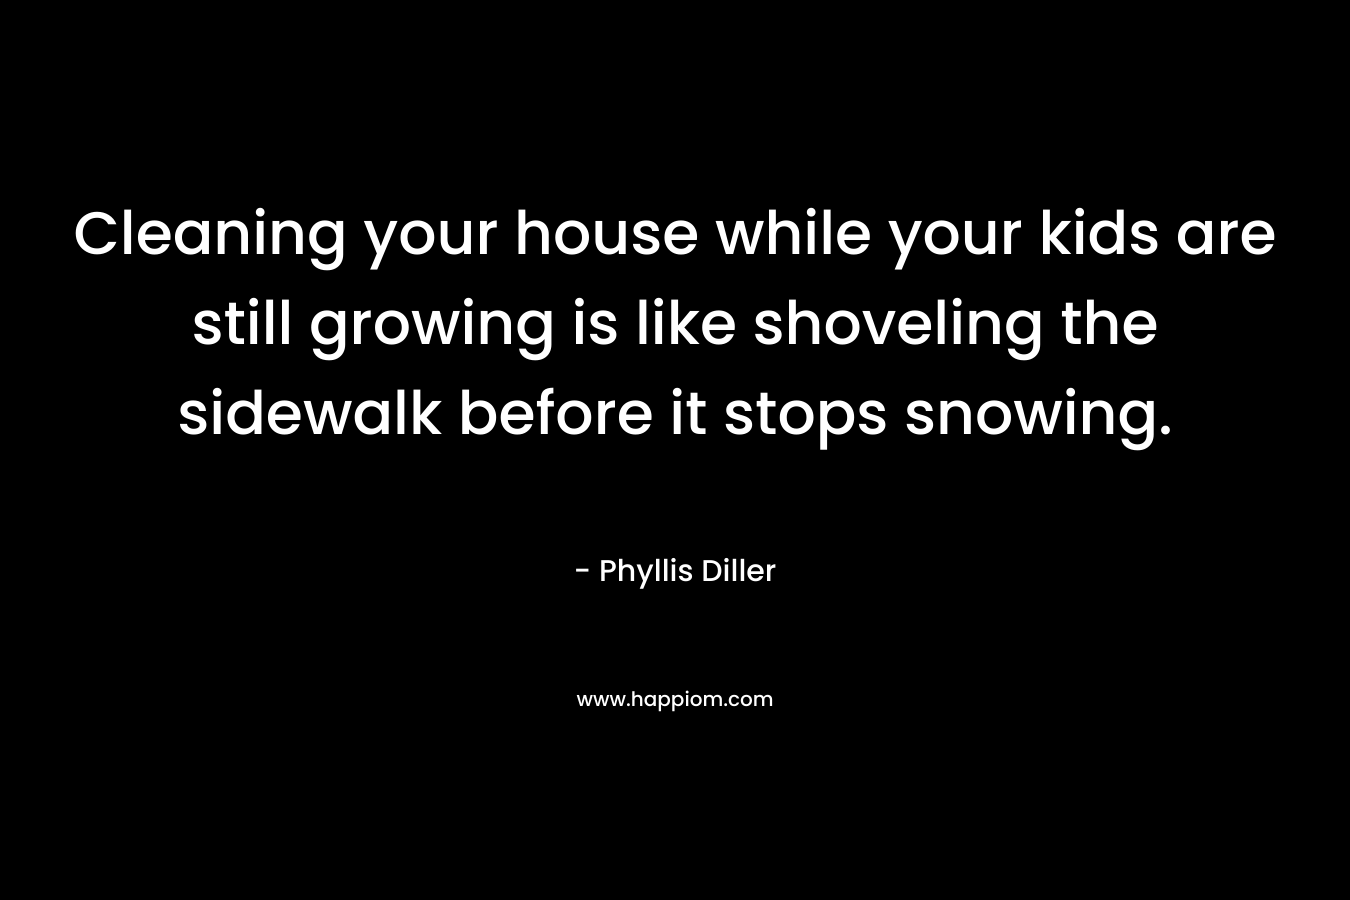 Cleaning your house while your kids are still growing is like shoveling the sidewalk before it stops snowing. – Phyllis Diller